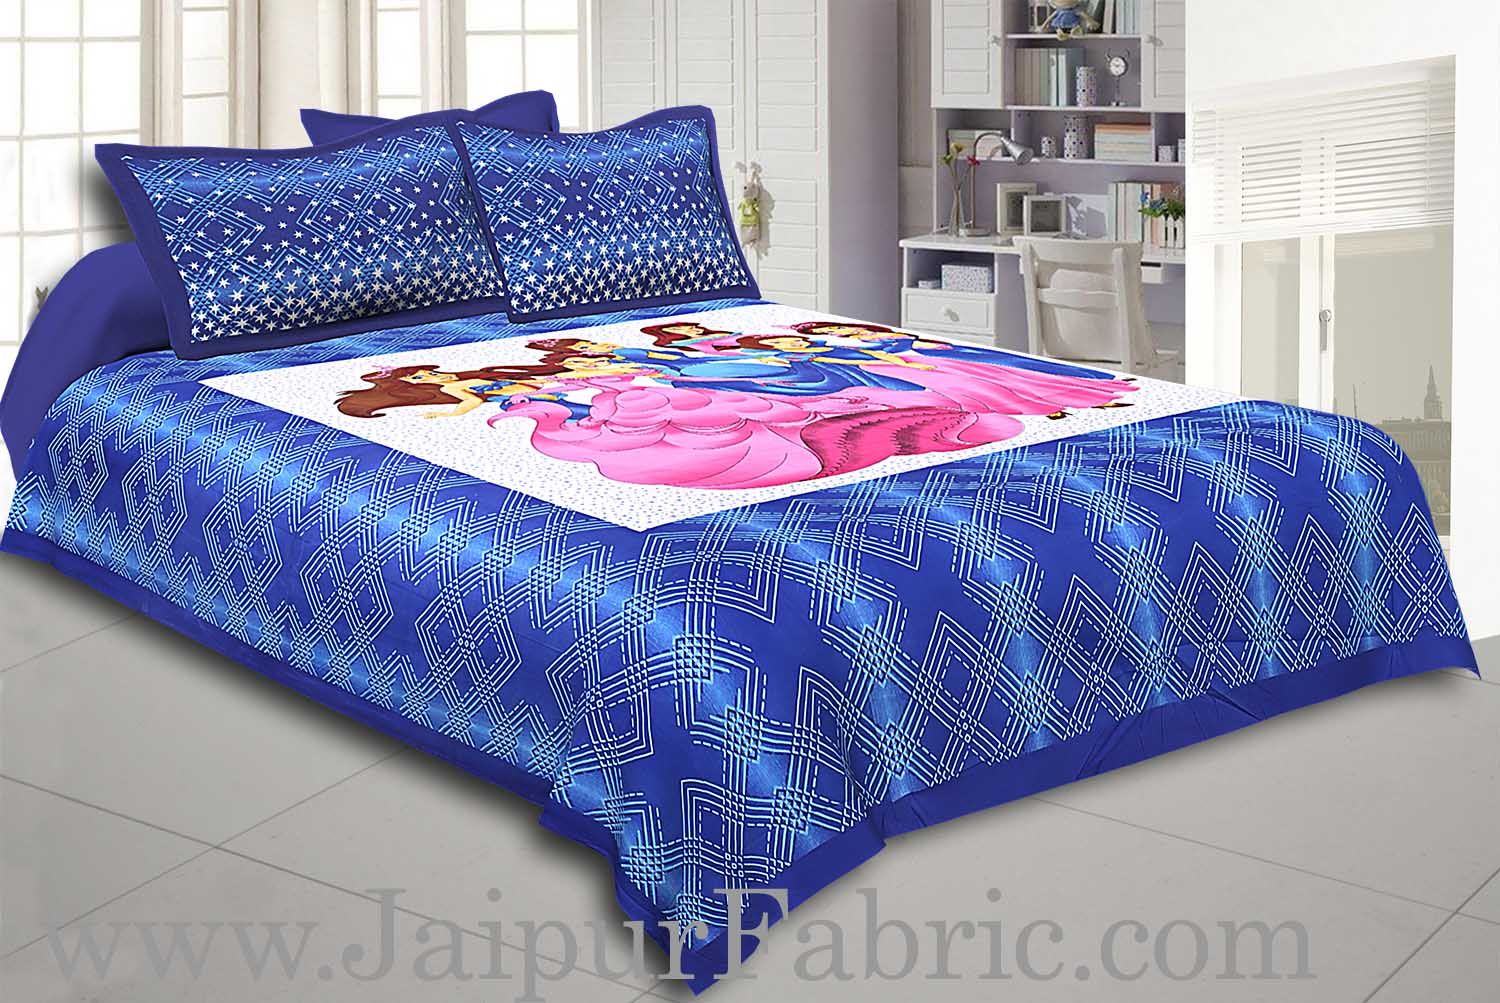 Buy Barbie Bed Sheets Online At Low Cost Jaipur Fabric